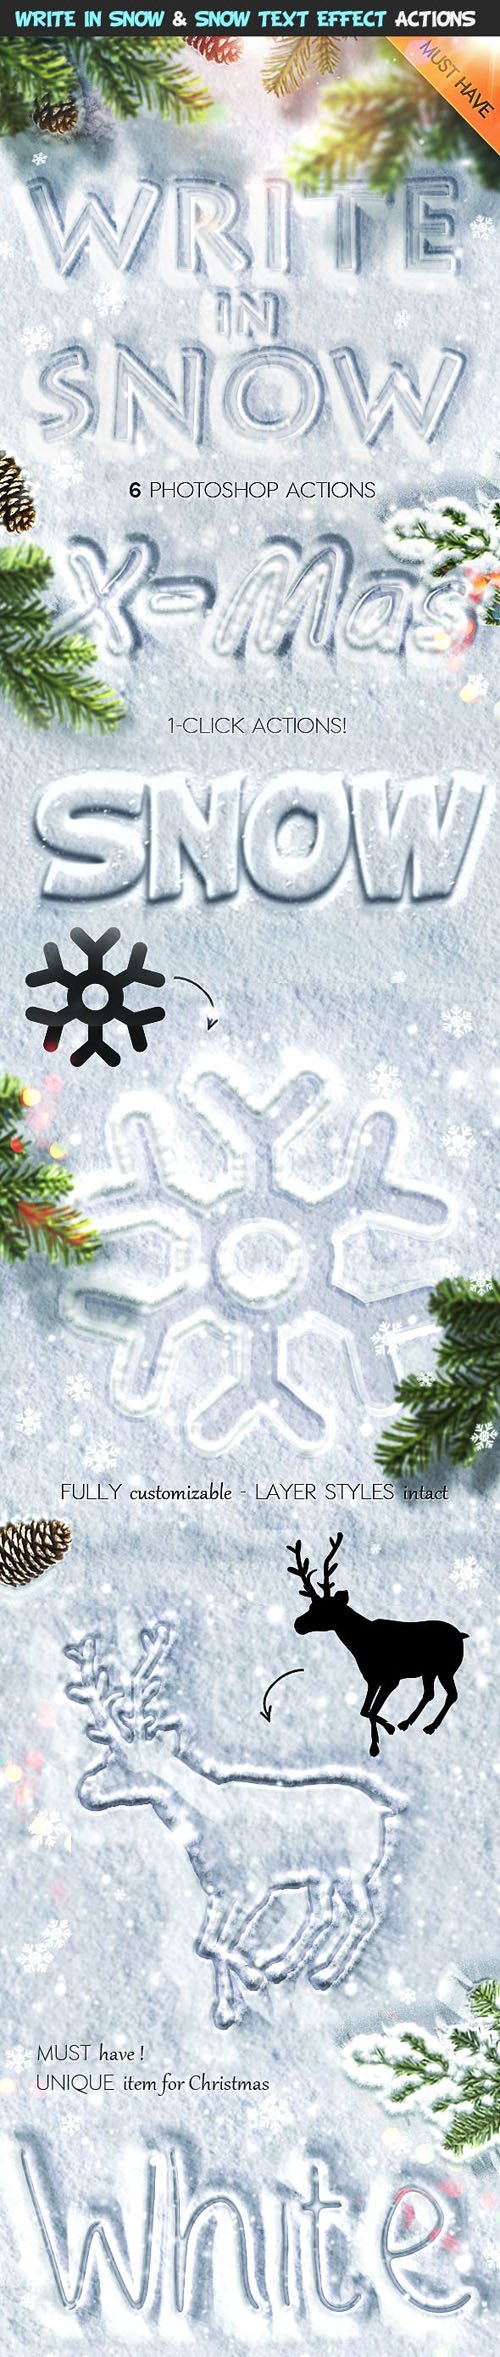 Write in Smow & Snow Text Effect Photoshop Actions, Brushes & Patterns